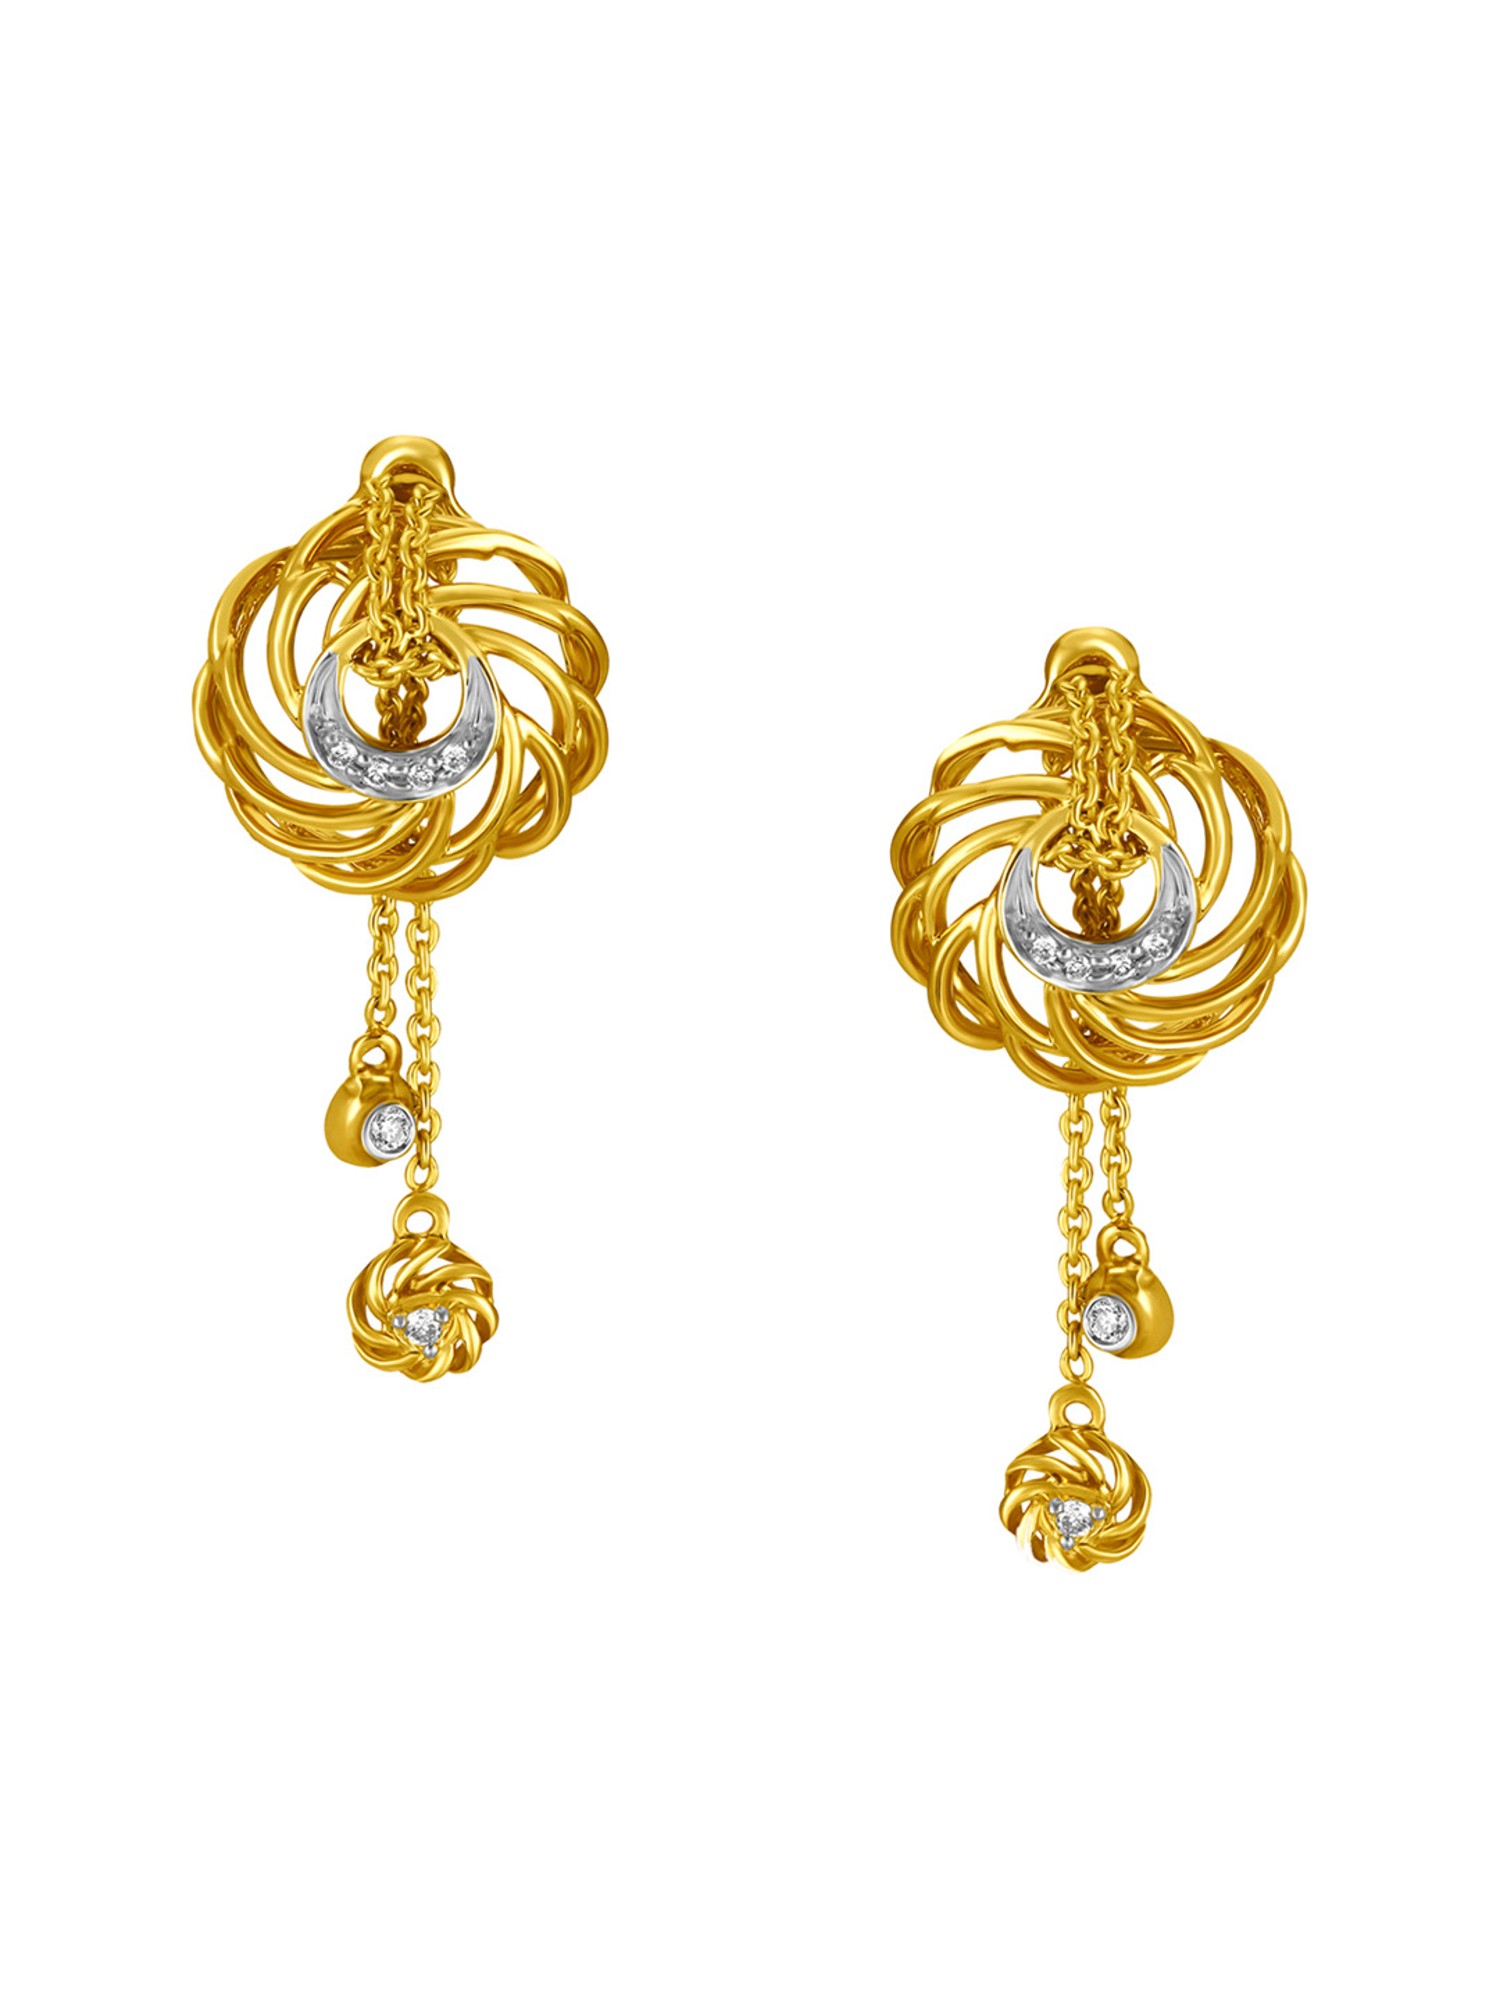 Mia by Tanishq 14 KT Dreamy Diamond Jhumkas Rose Gold 14kt Jhumki Earring  Price in India - Buy Mia by Tanishq 14 KT Dreamy Diamond Jhumkas Rose Gold  14kt Jhumki Earring online